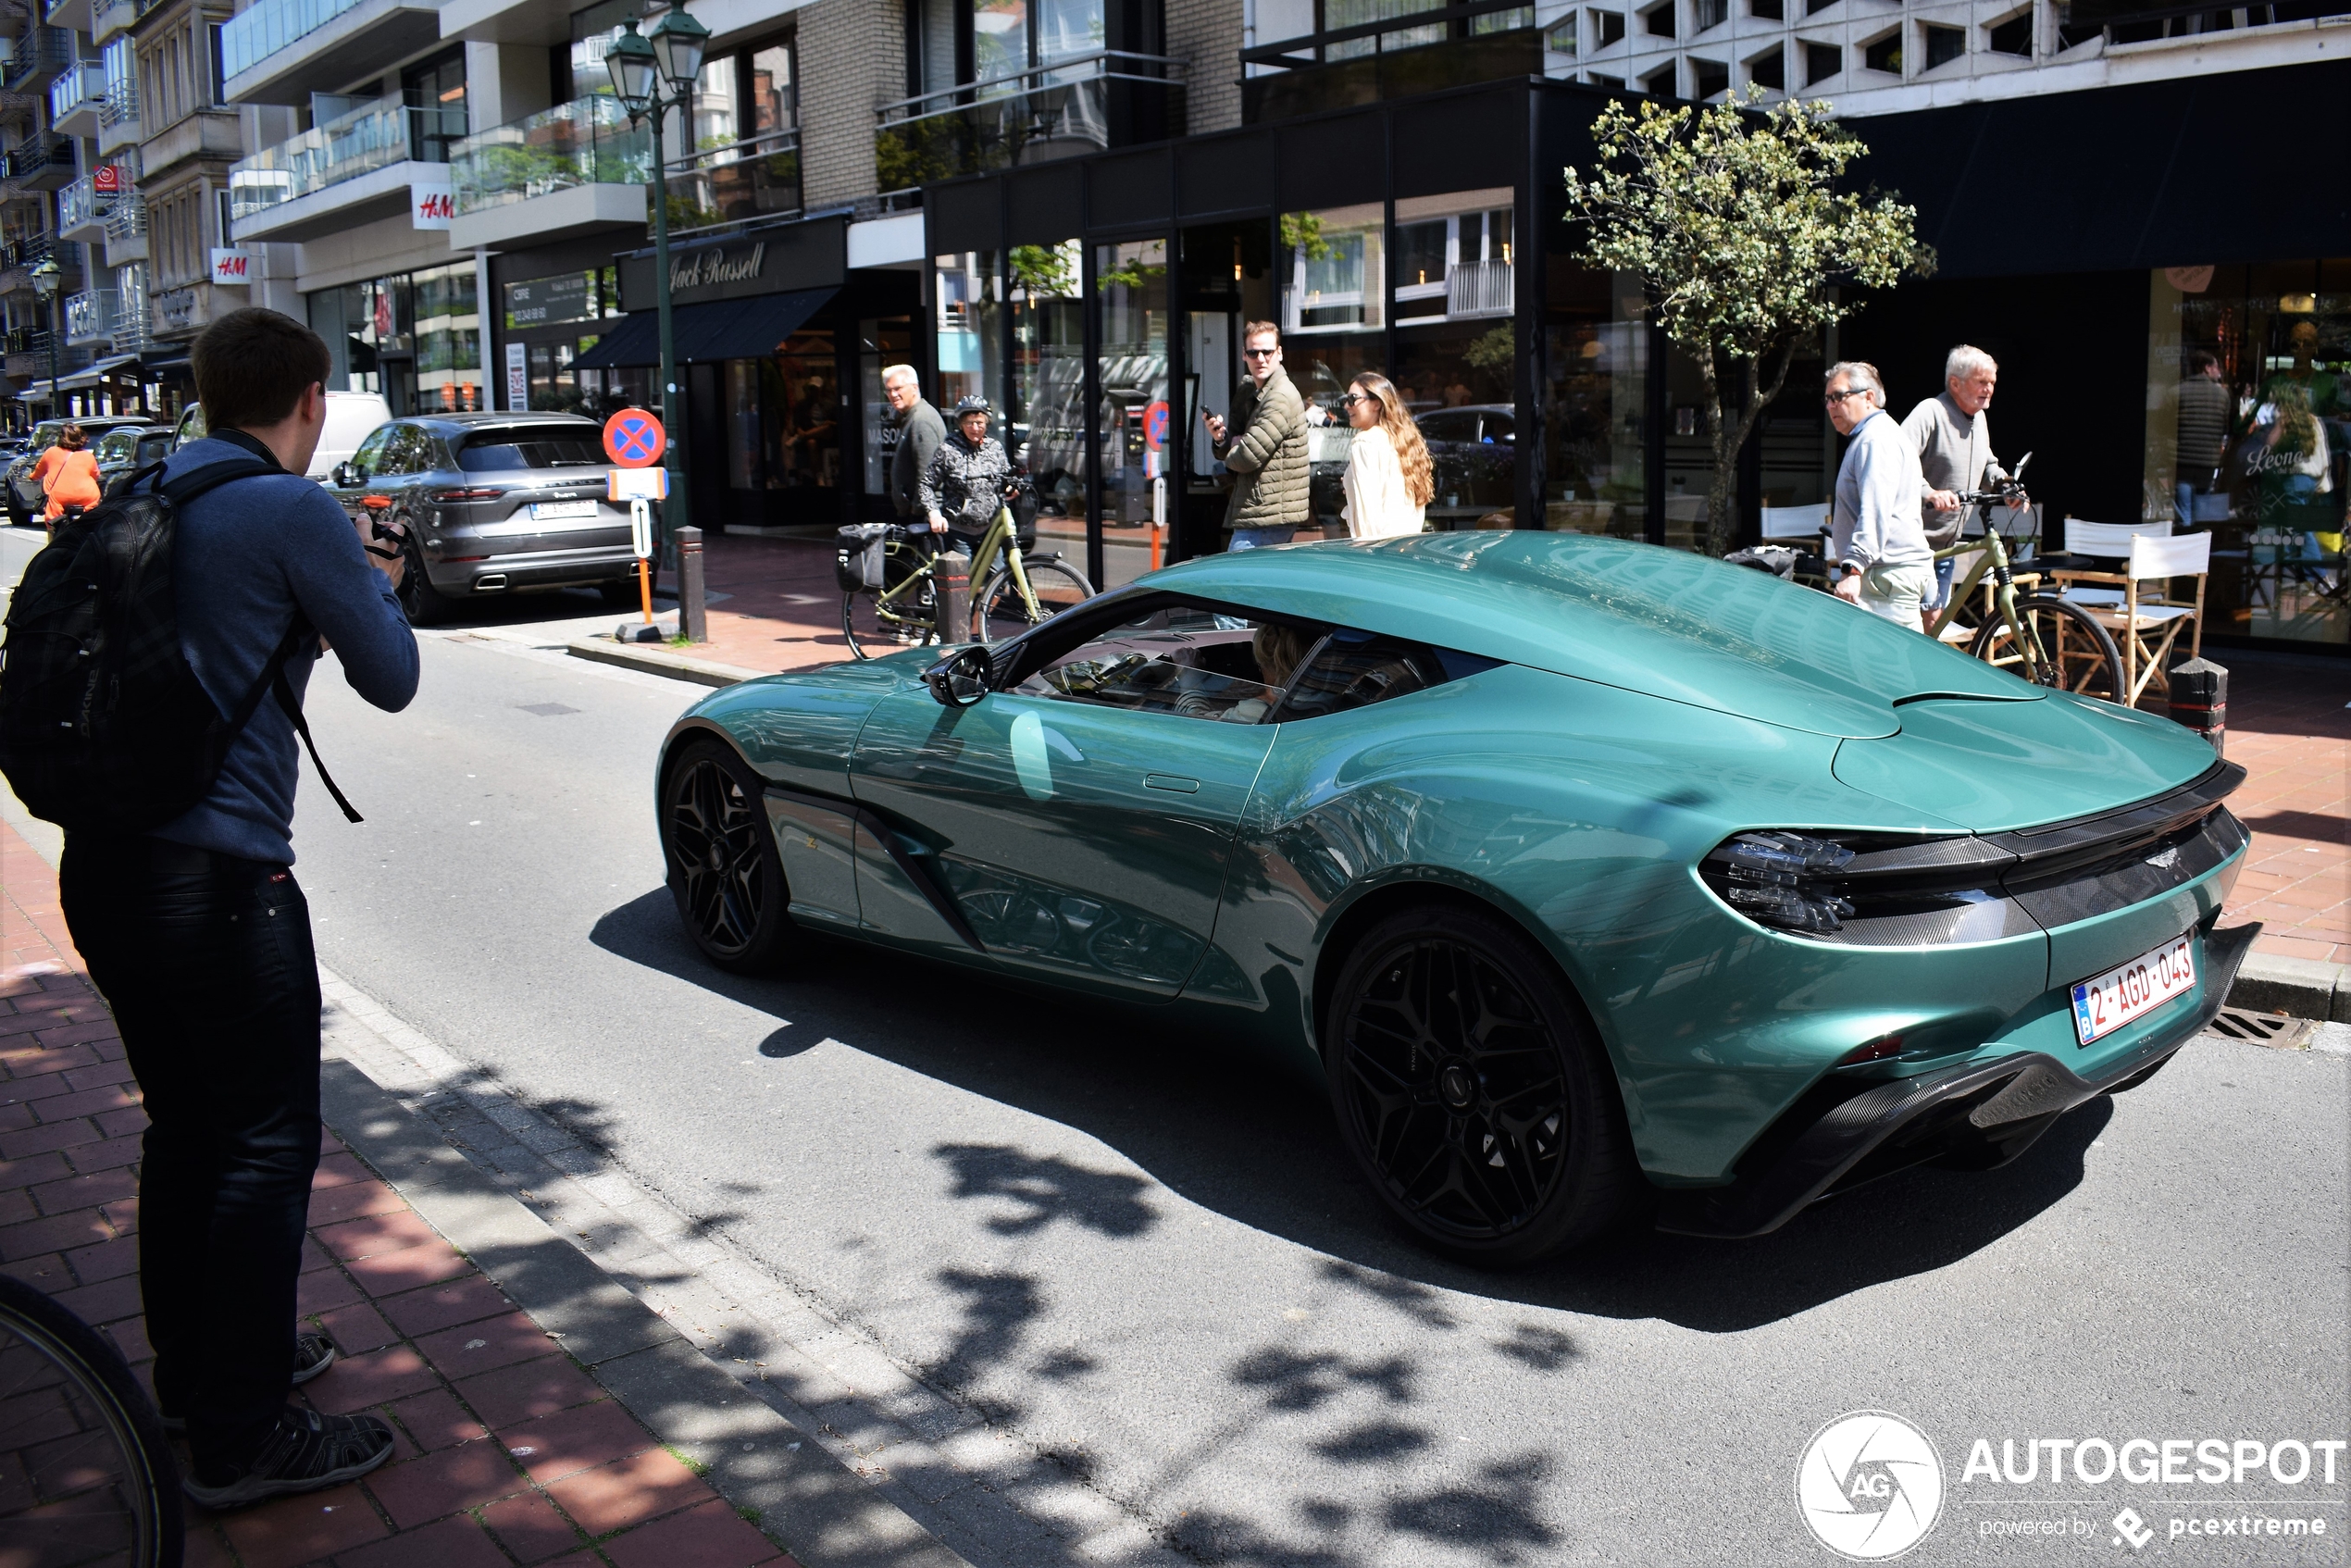 Extremely rare Aston Martin DBS GT Zagato shows up at Knokke-Heist.